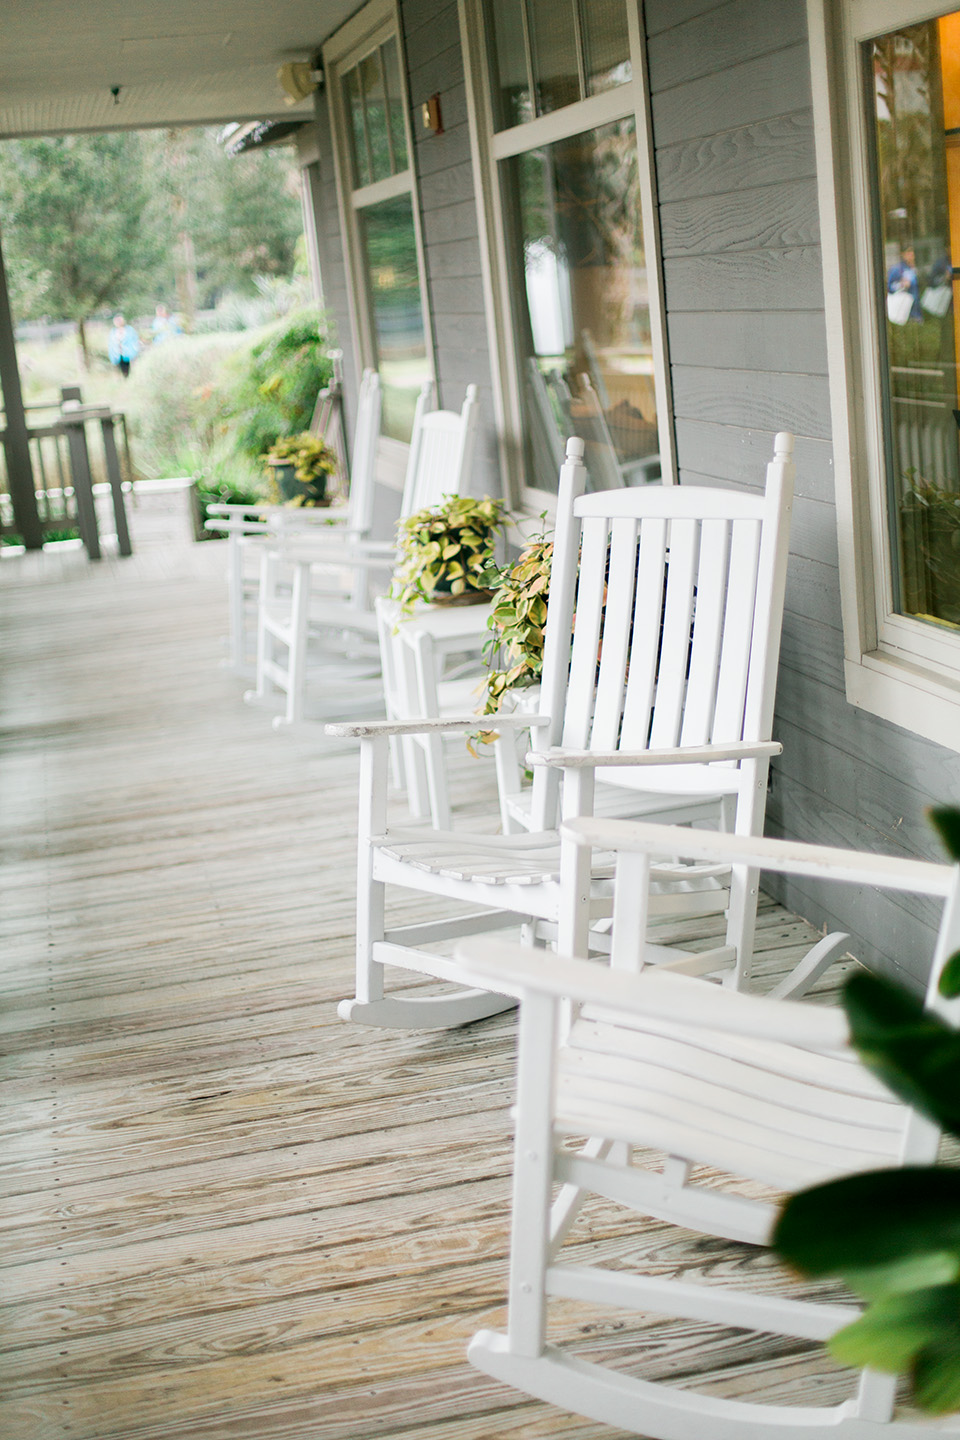 Picture of the Spa Boutique rocking chairs on the Omni Amelia Island Plantation Resort.